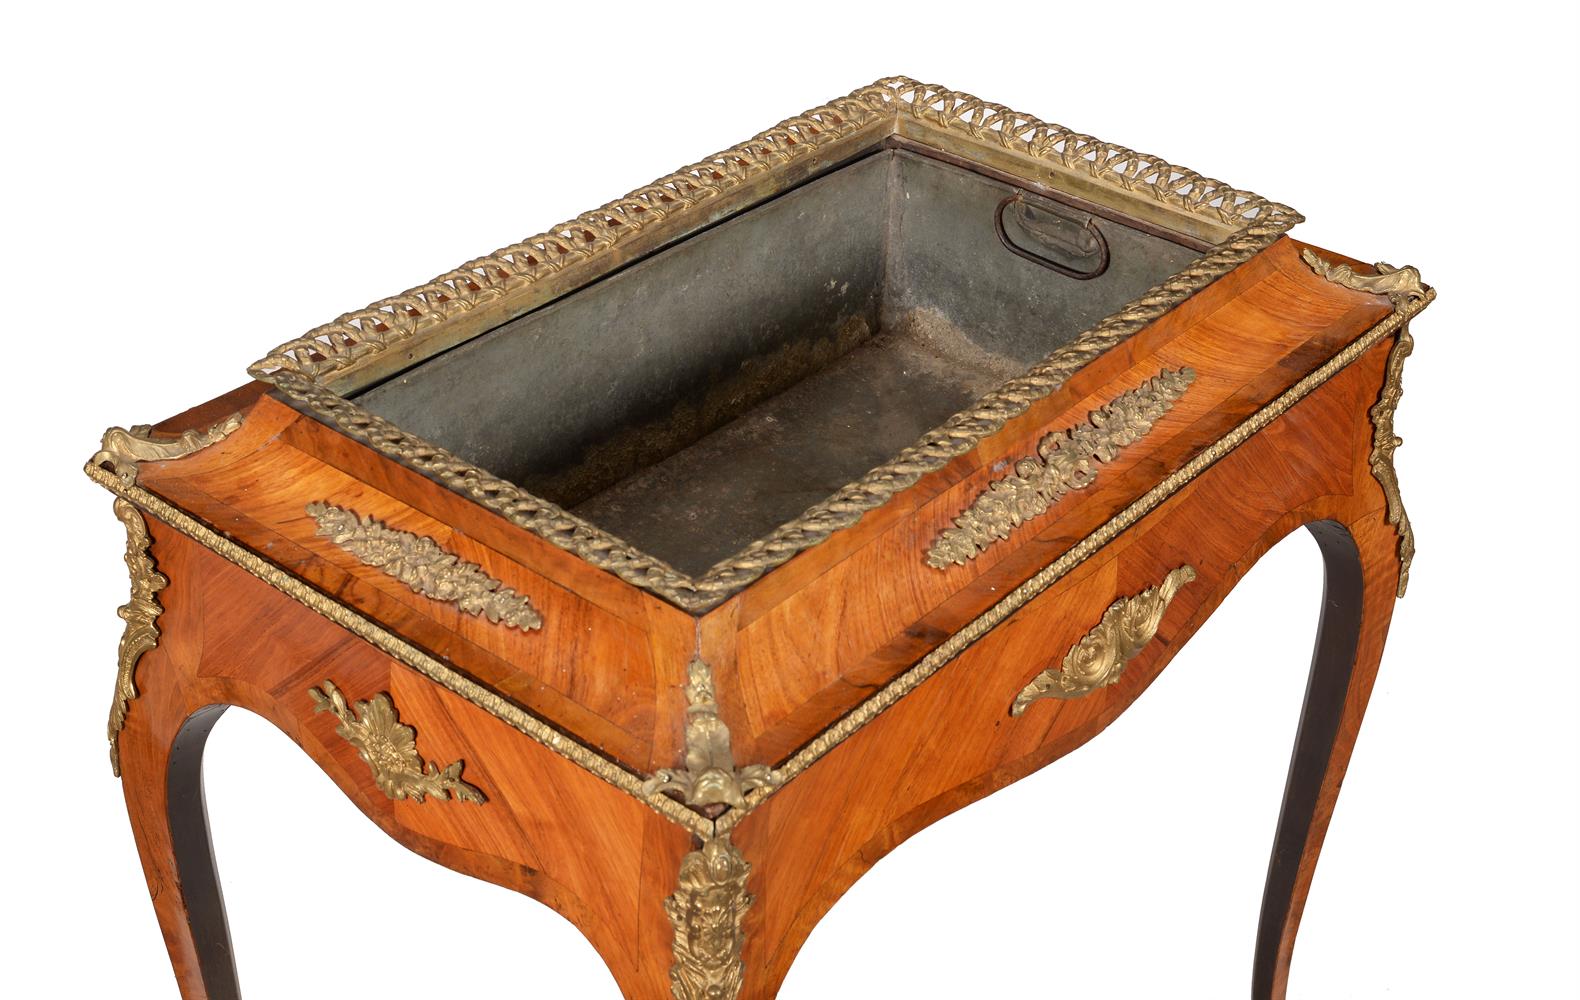 A FRENCH PARQUETRY AND GILT METAL MOUNTED JARDINIERE TABLE - Image 3 of 3